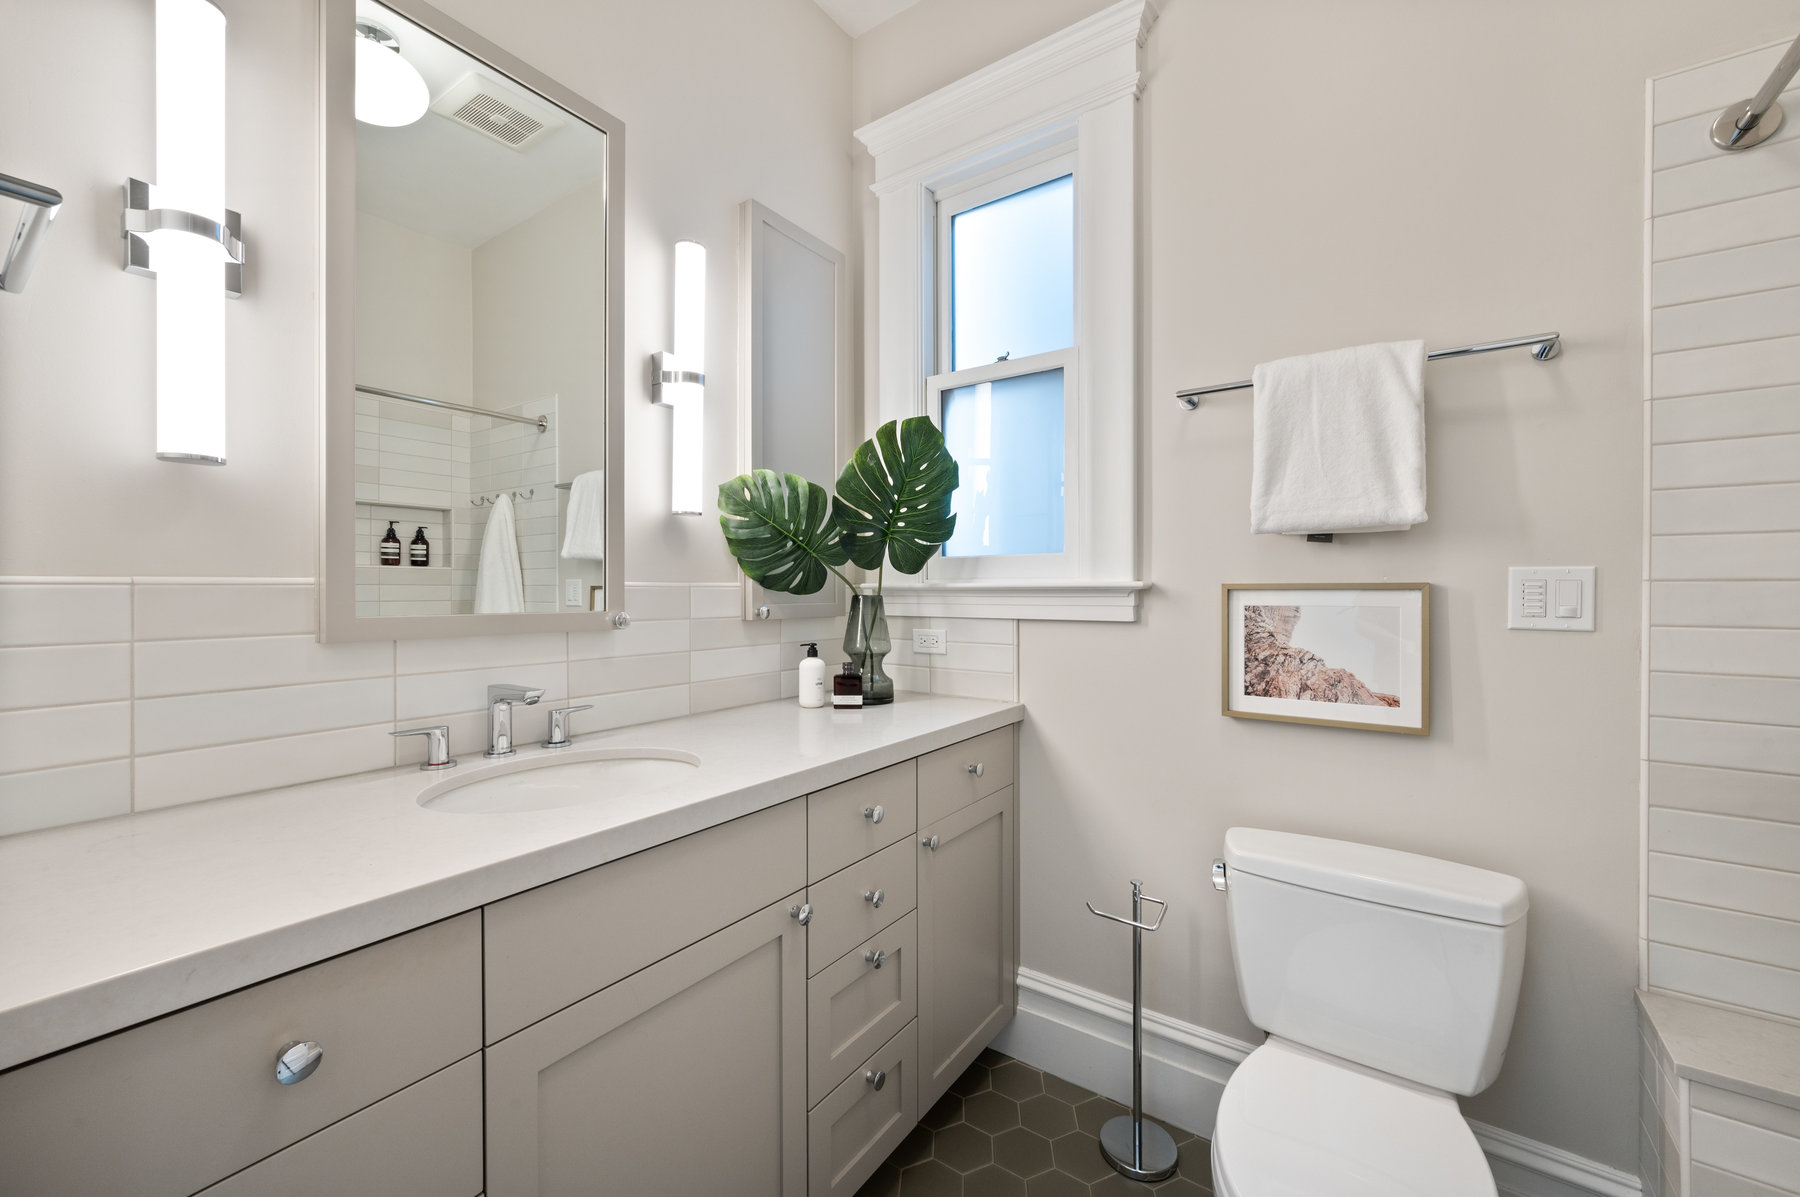 Property Photo: Bathroom with large vanity w/ one sink. Lots of light tones. 